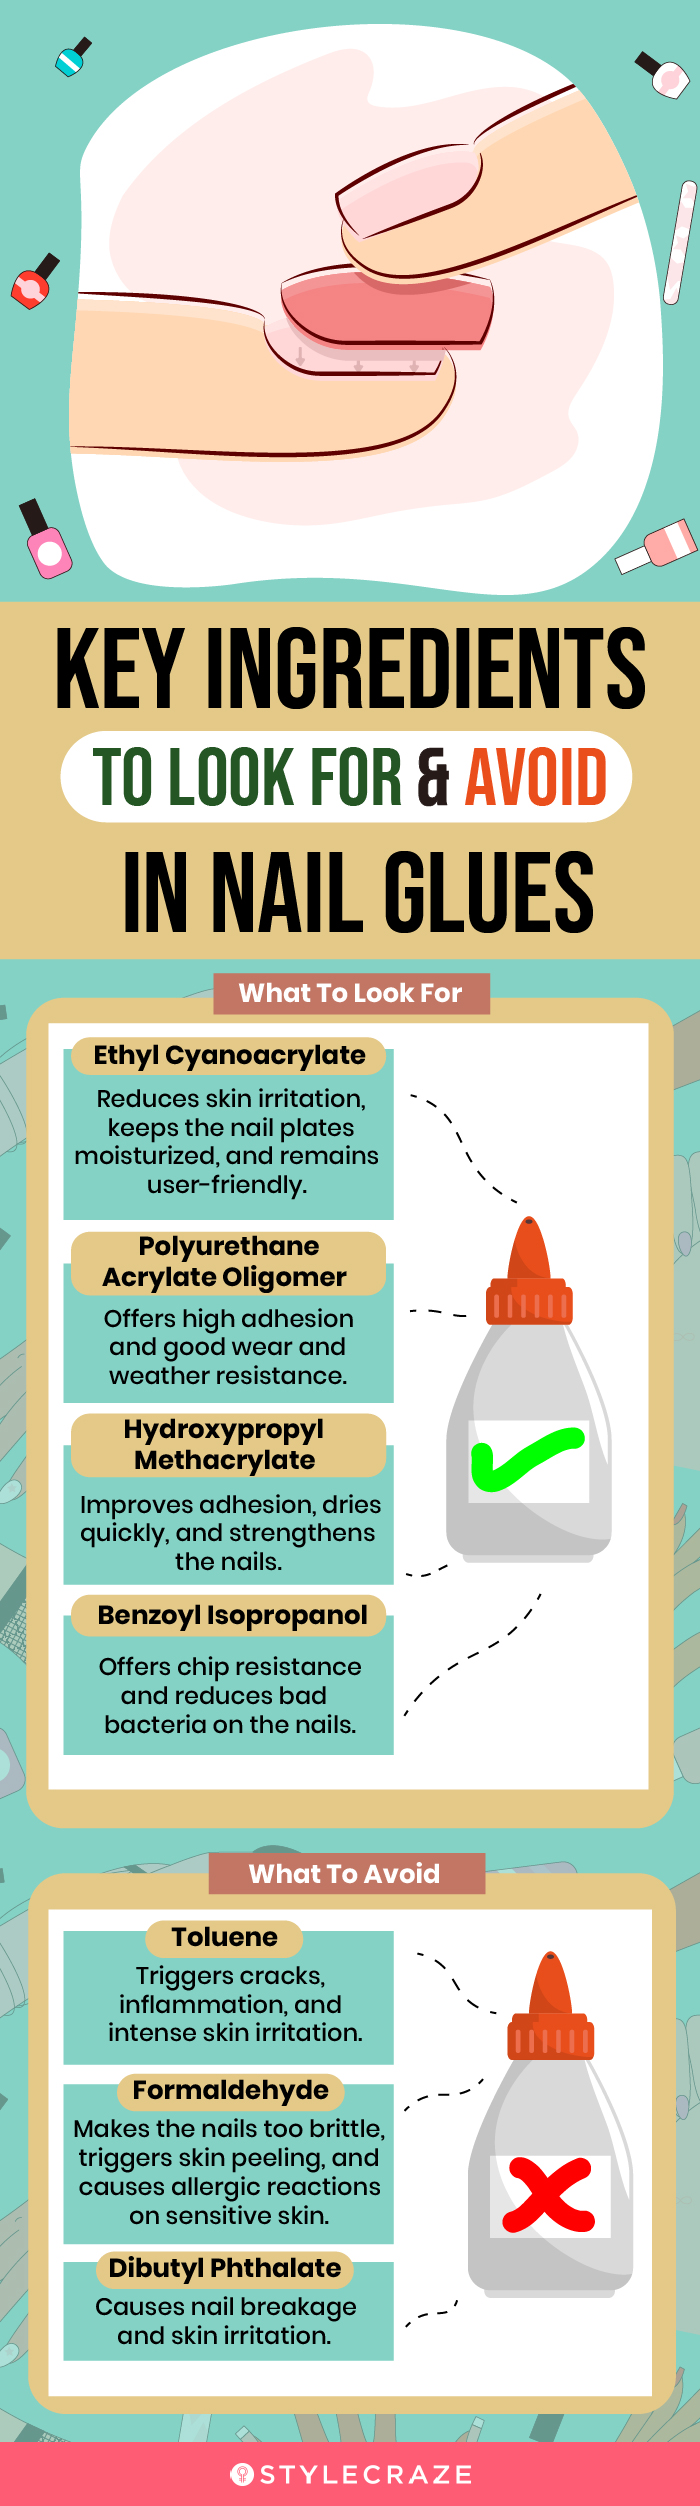 Key Ingredients To Look For & Avoid In Nail Glues (infographic)